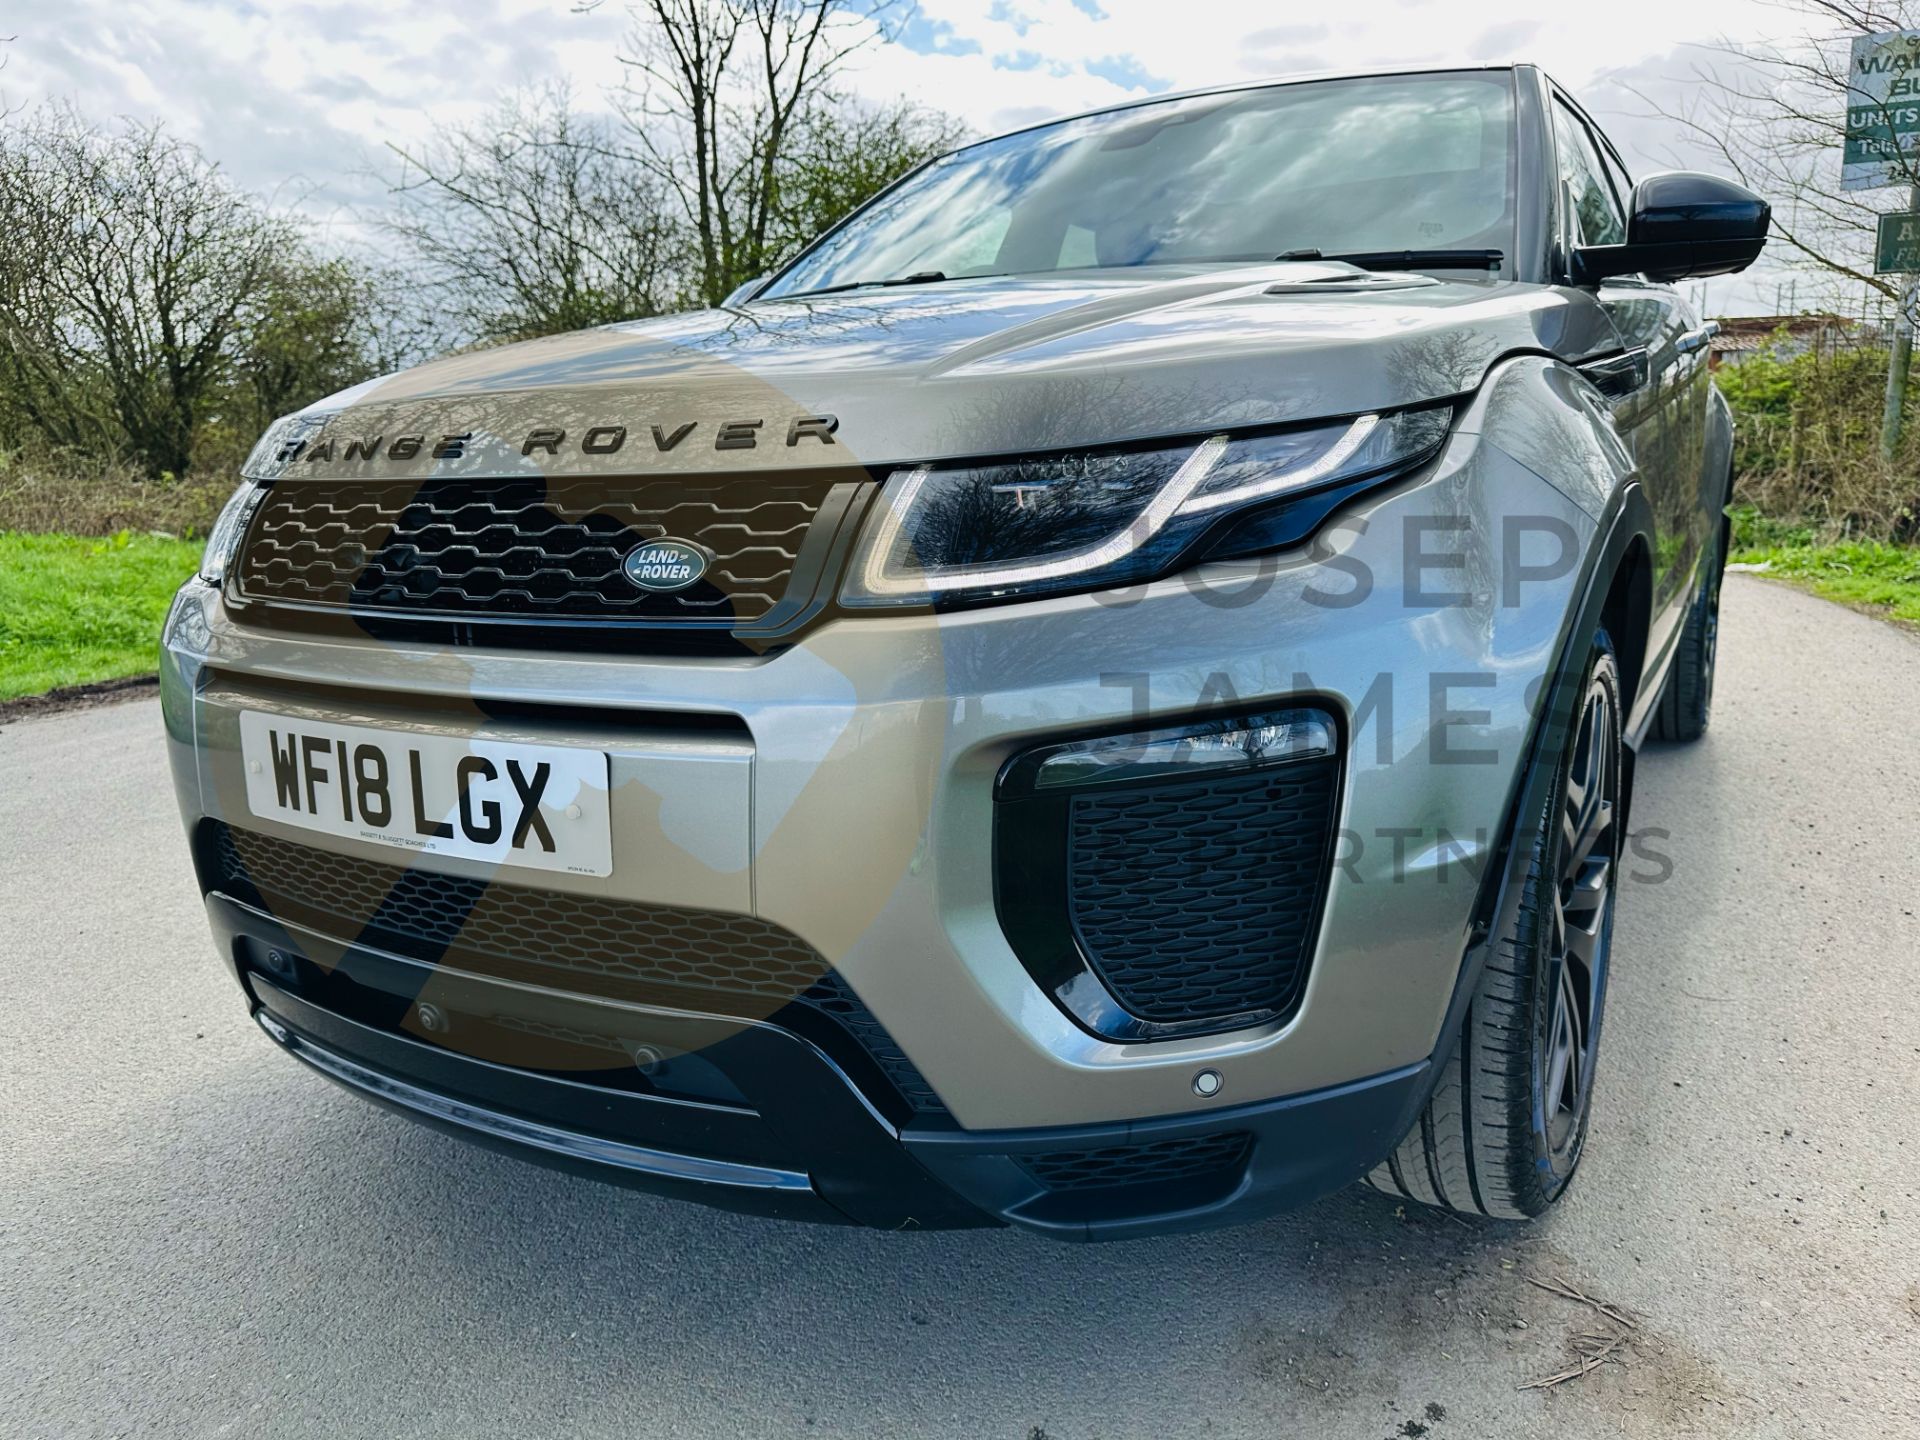 (On Sale) RANGE ROVER EVOQUE *HSE DYNAMIC* SUV (2018 - EURO 6) 2.0 SD4 - AUTOMATIC *ULTIMATE SPEC* - Image 5 of 48